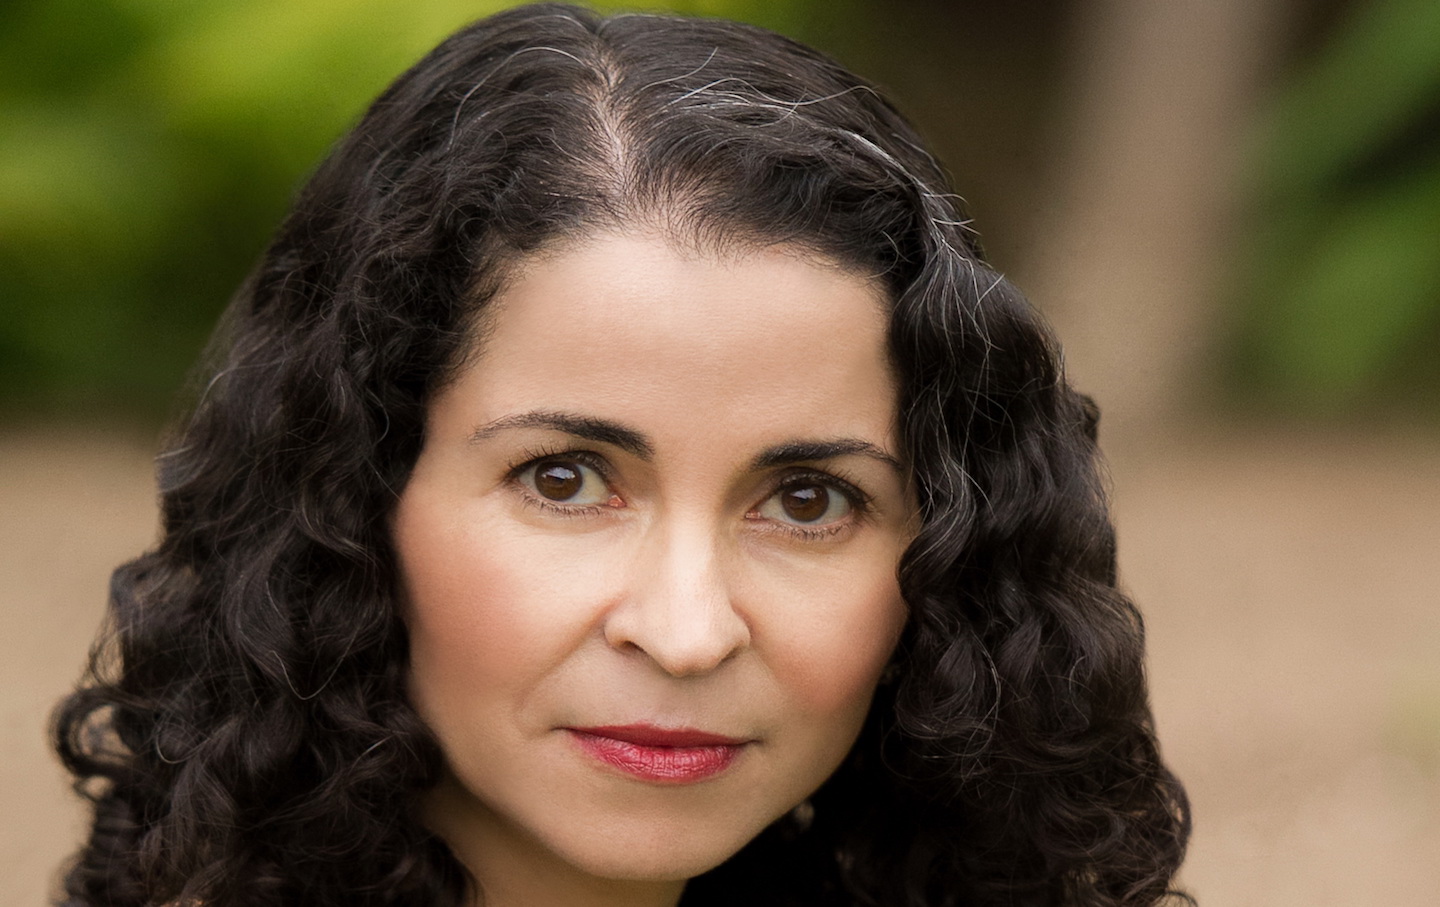 Migrant State of Mind: A Q&A With Novelist Laila Lalami